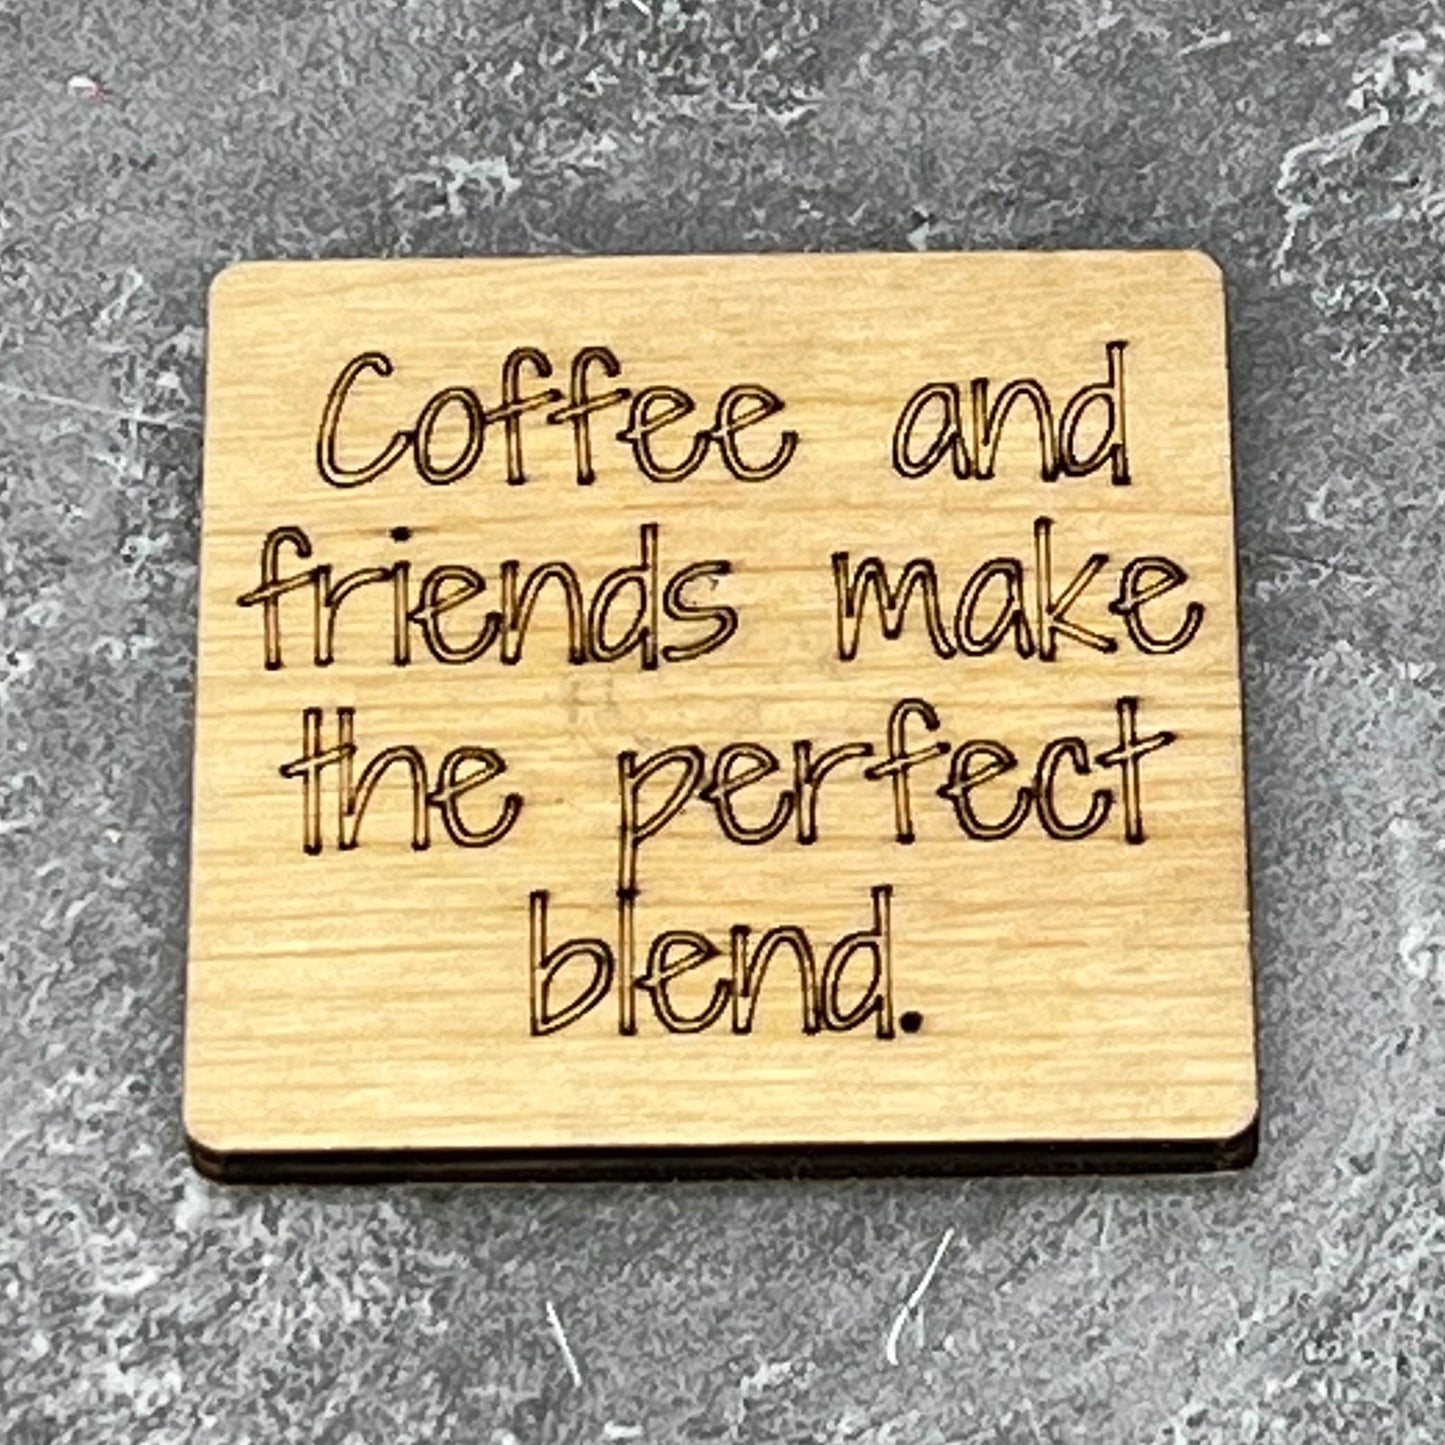 Fridge Magnet: Coffee and Friends Make the Perfect Blend.